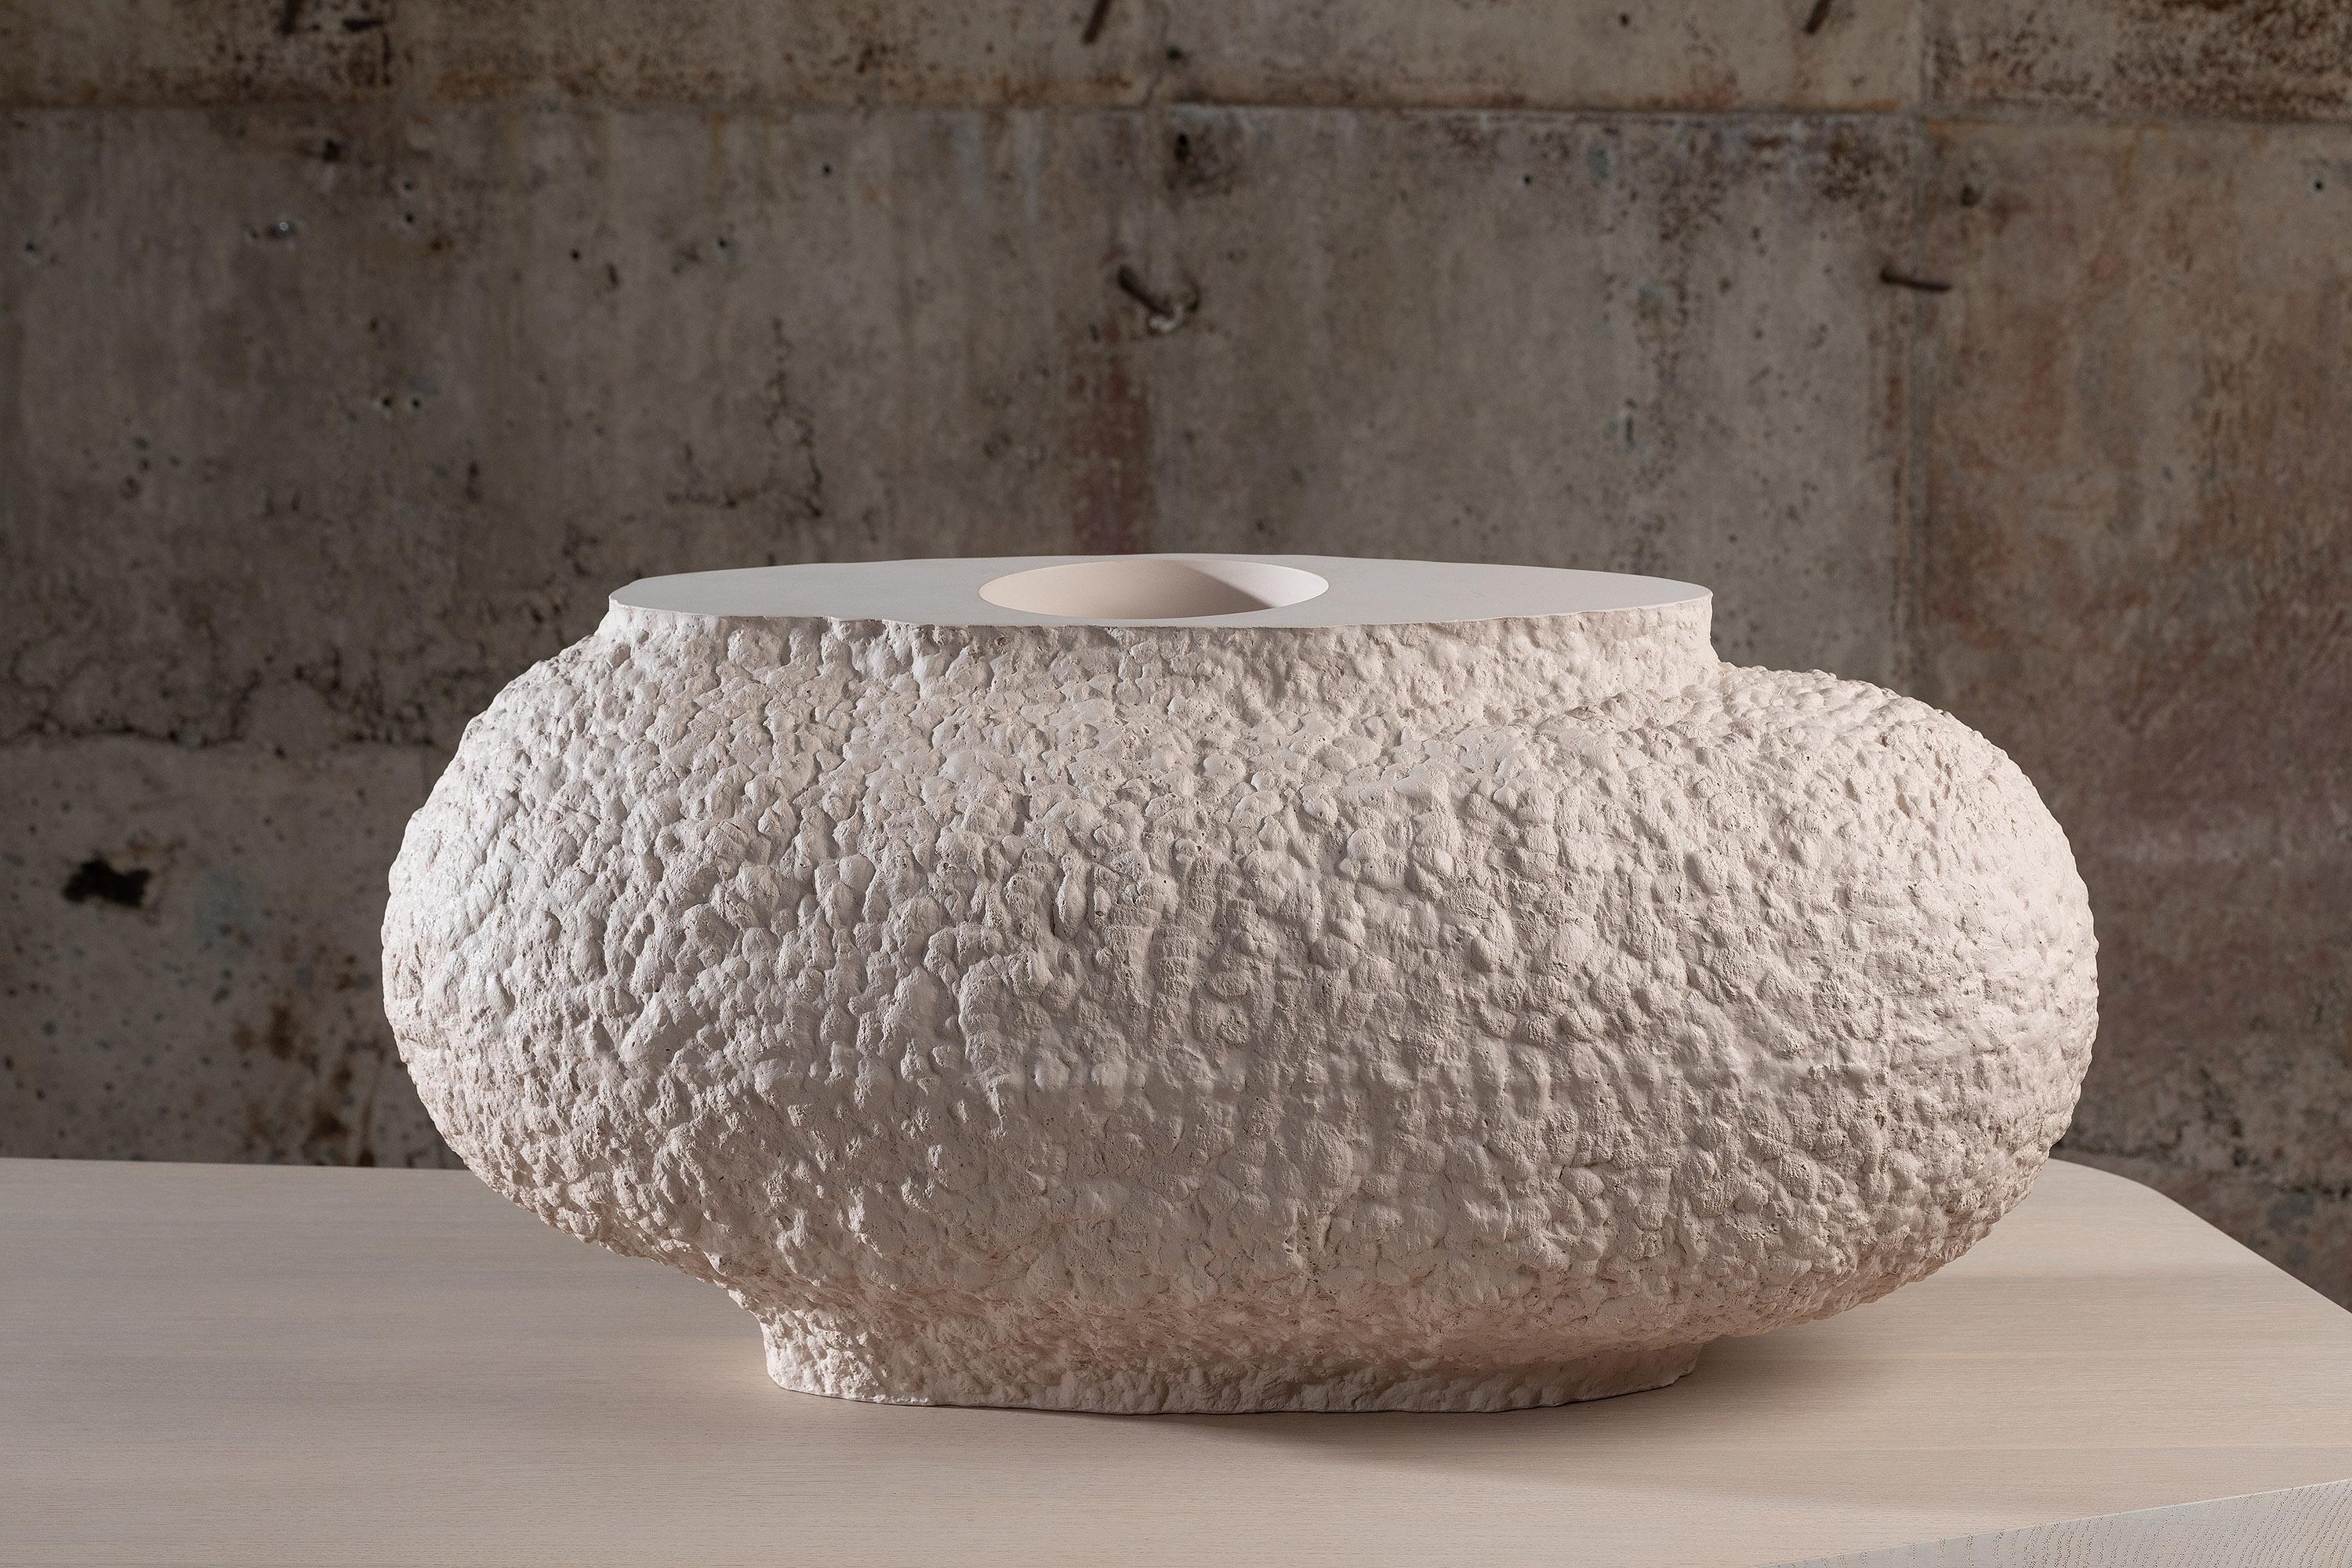 Contemporary Jesmonite Vessel - Acacia by Malgorzata Bany.

ACACIA vessel takes inspiration from daily cleansing rituals and the process of natural decay. The construction of these pieces is a very intuitive process of carving away the material and